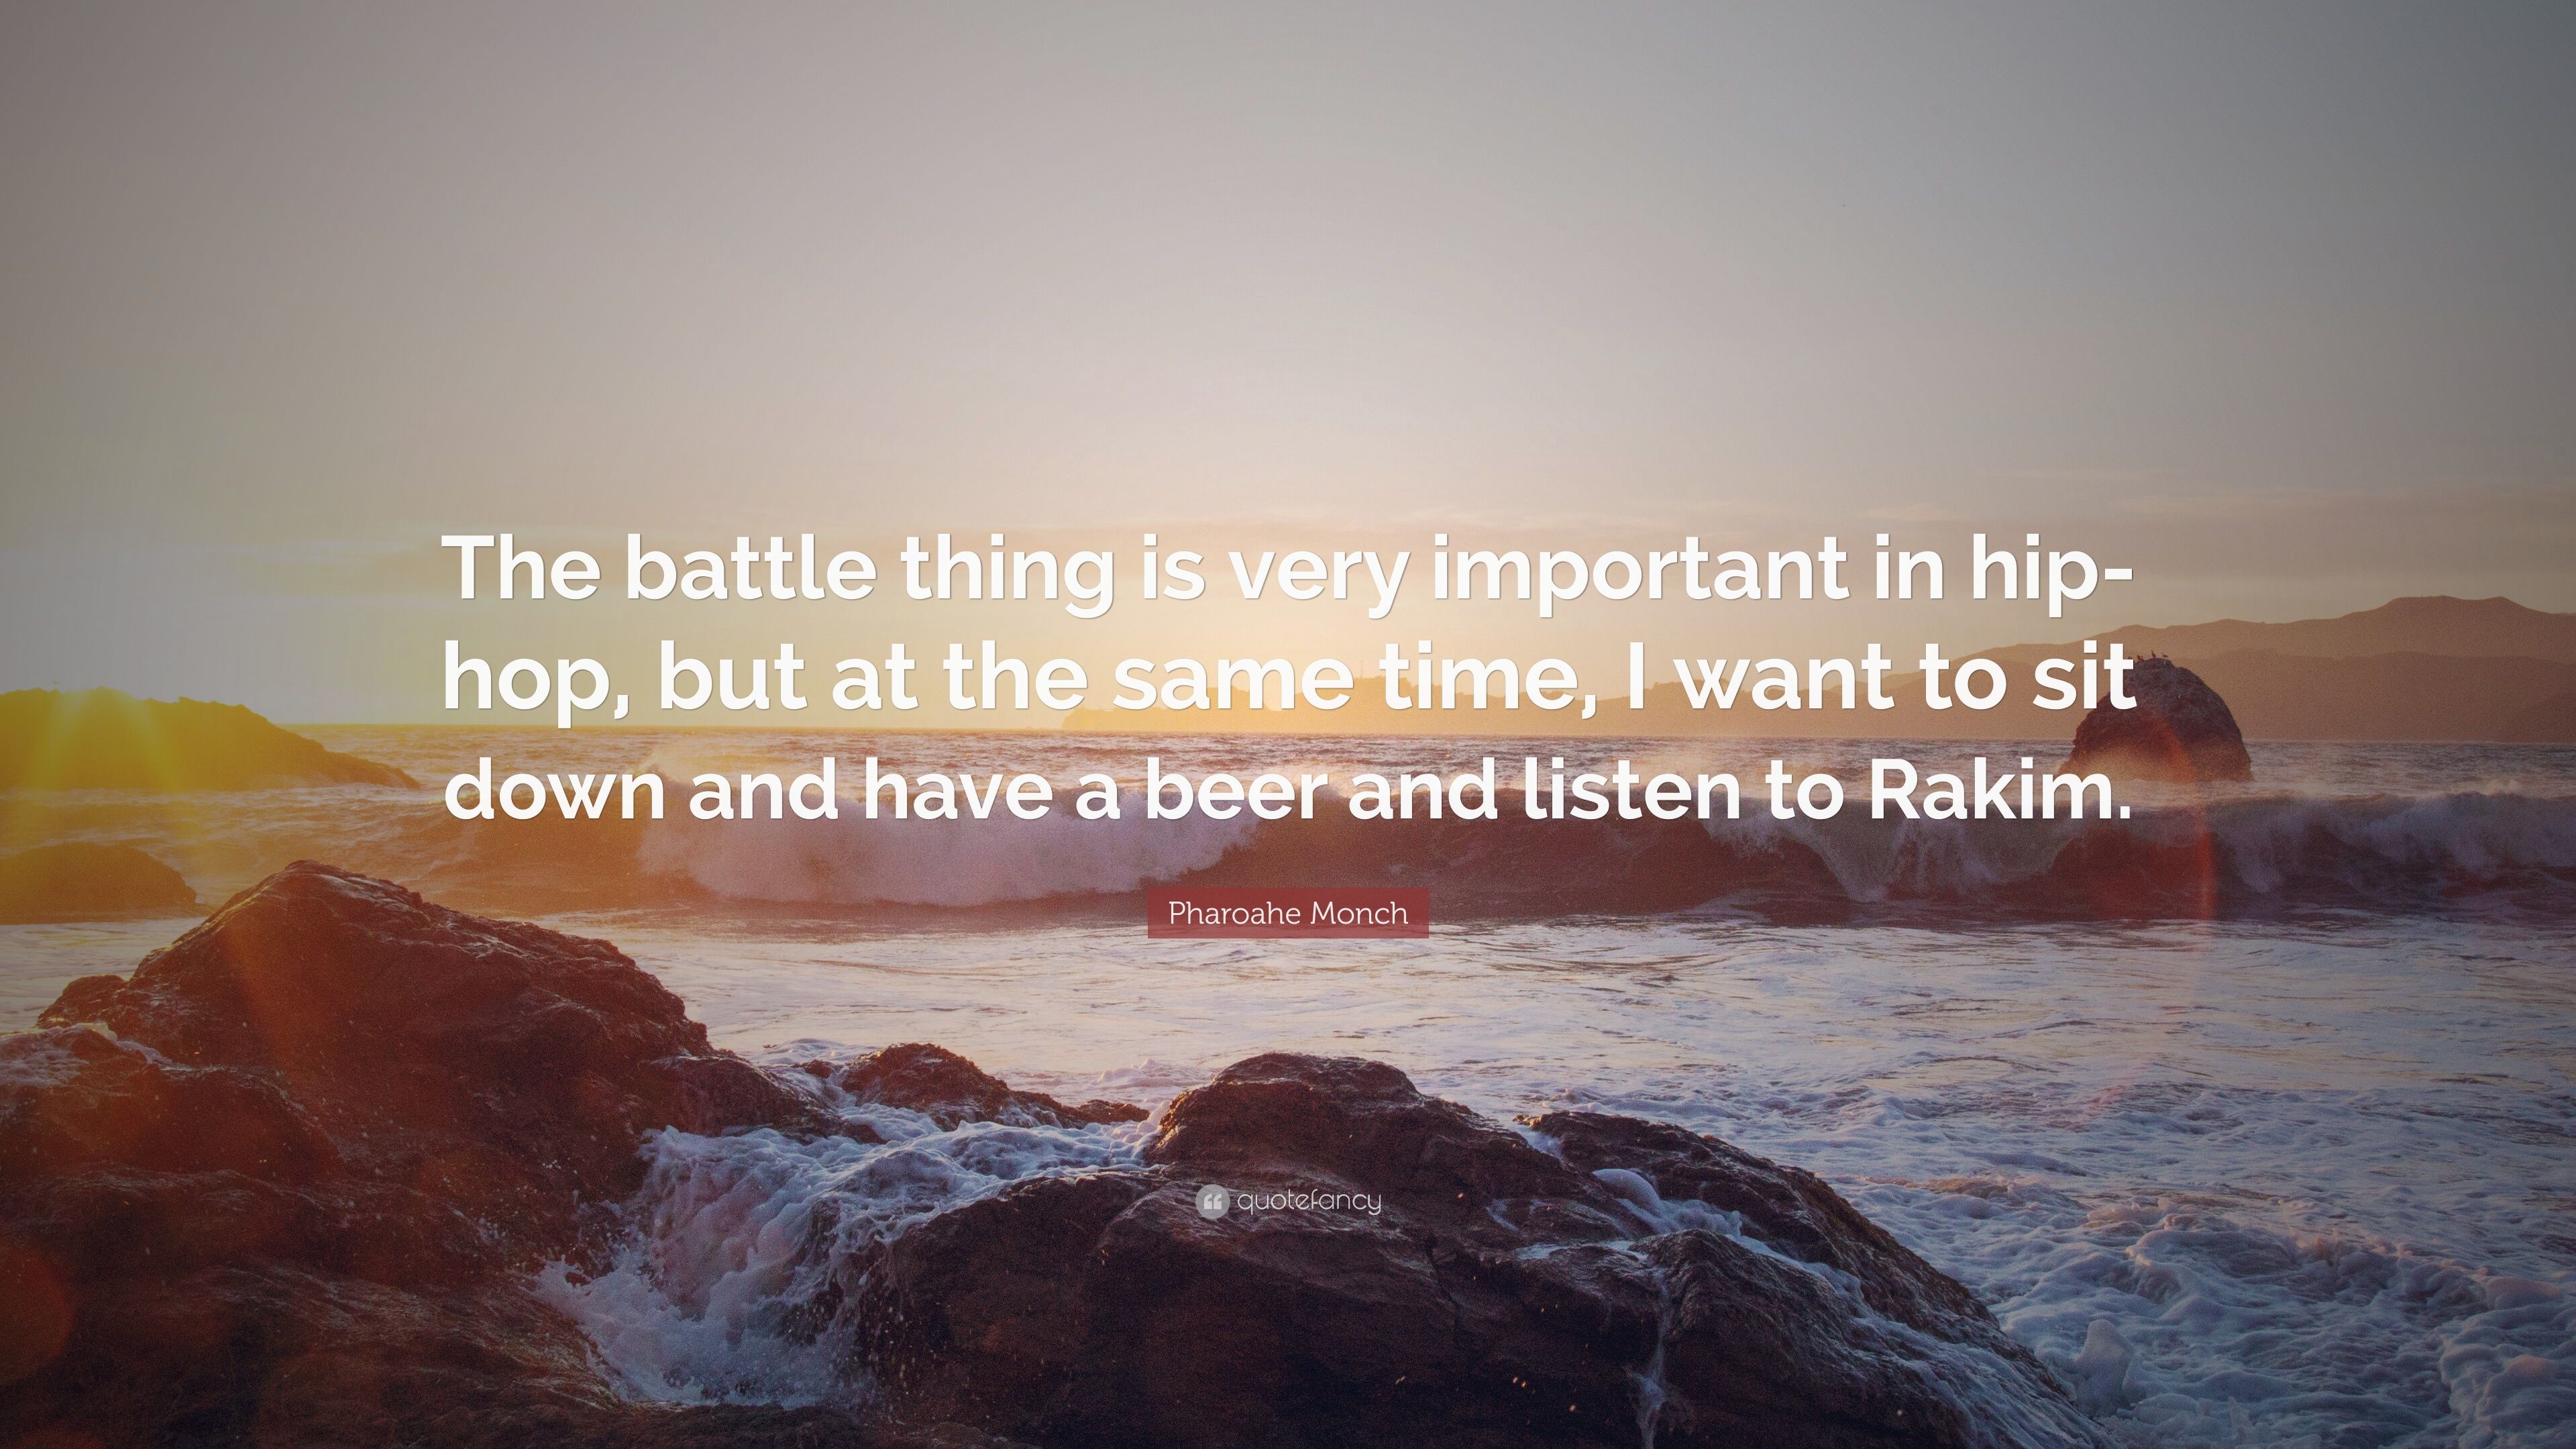 3840x2160 Pharoahe Monch Quote: “The battle thing is very important in hip-hop,